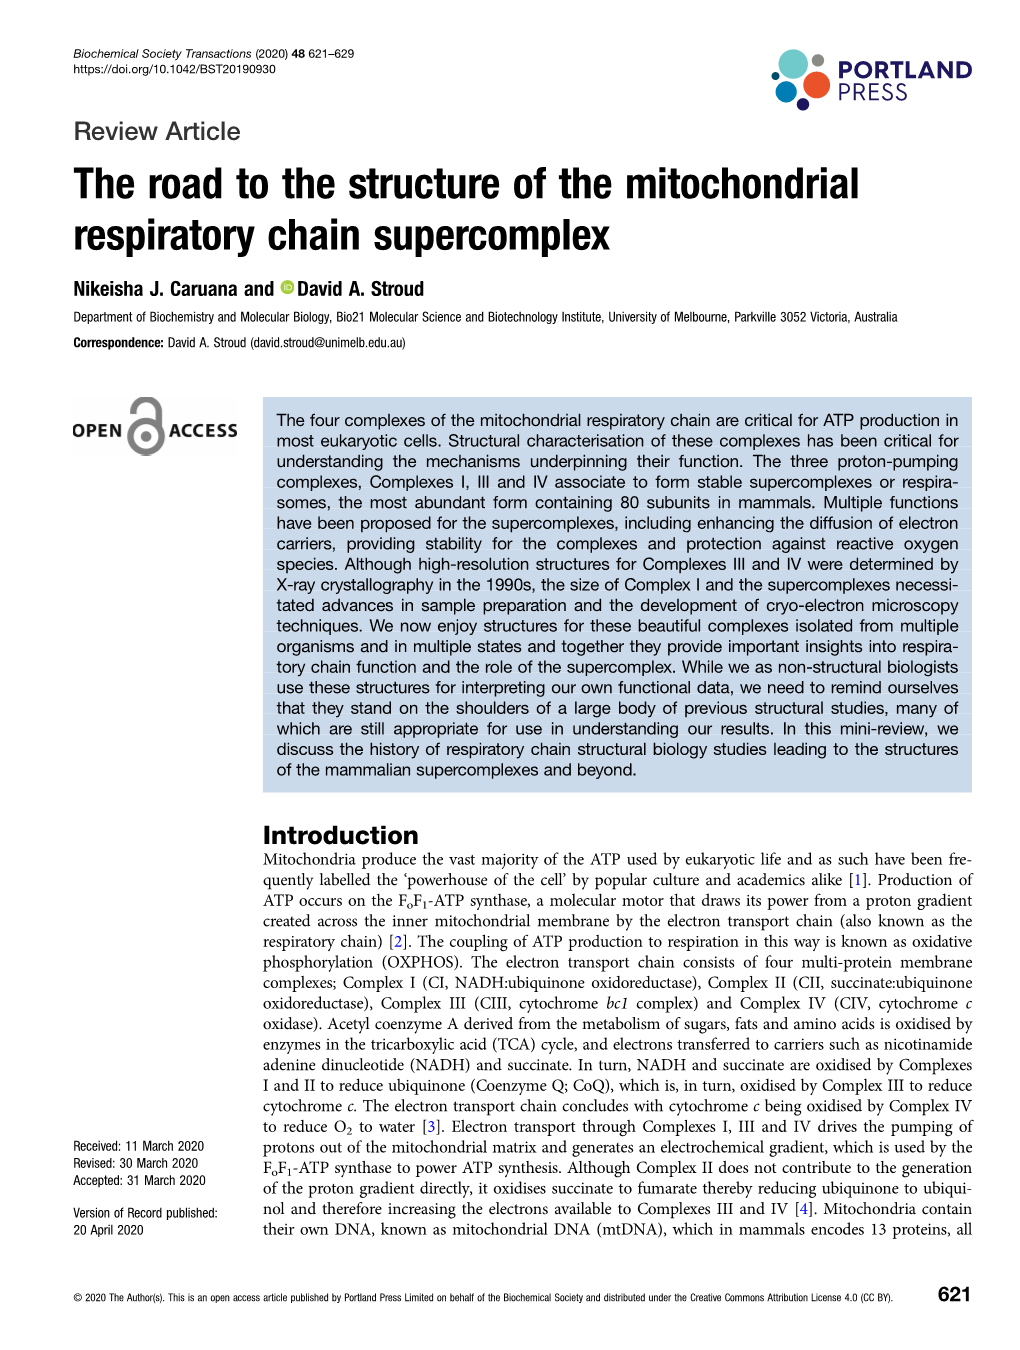 The Road to the Structure of the Mitochondrial Respiratory Chain Supercomplex